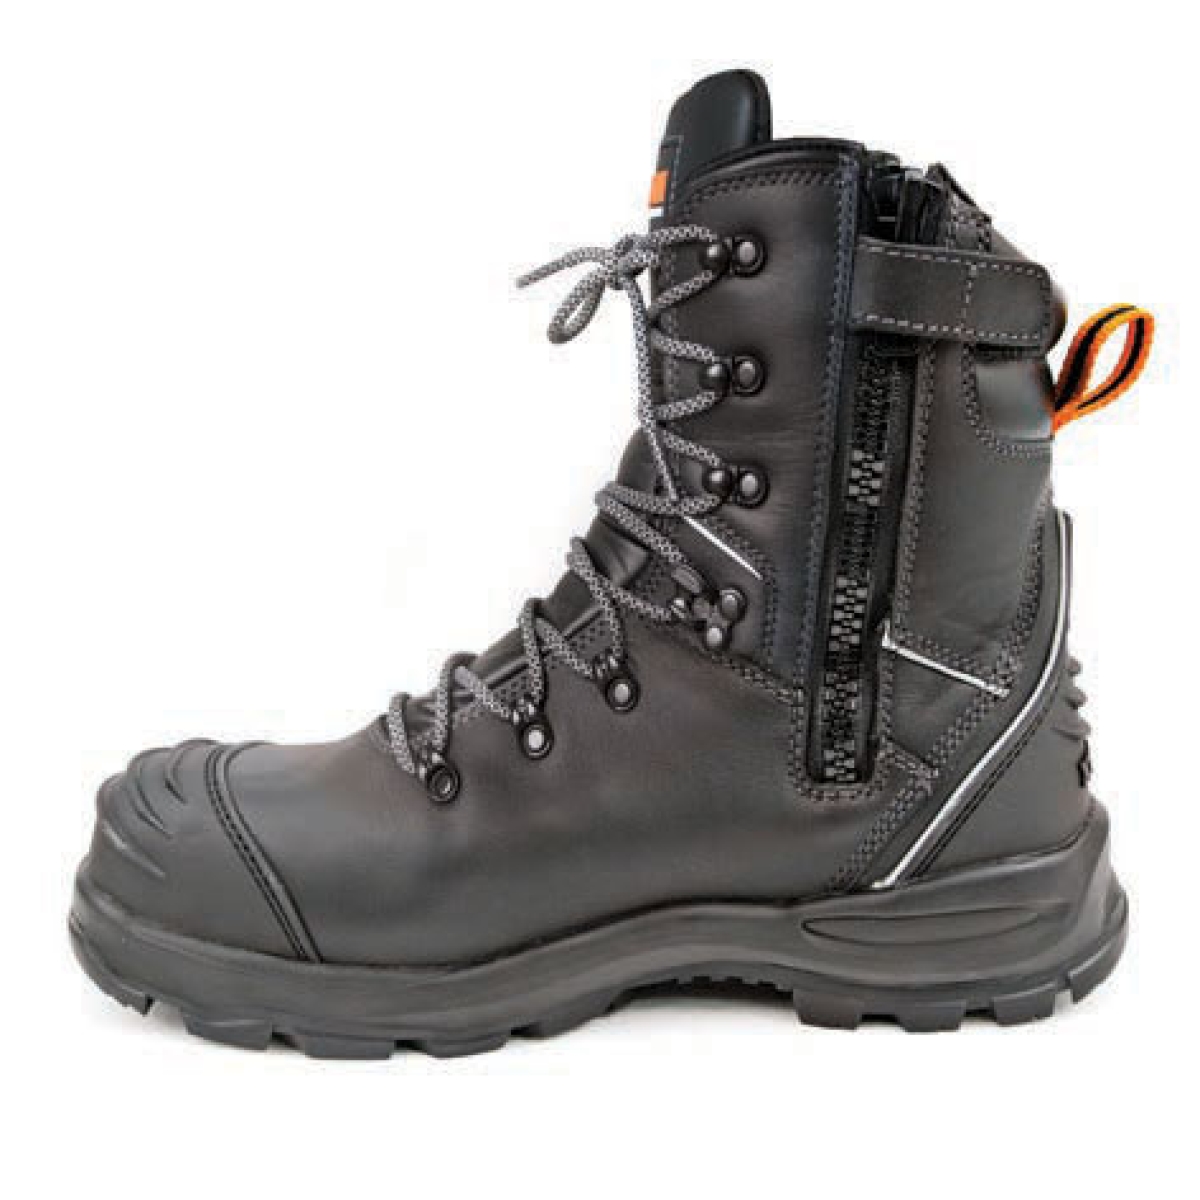 Bison Extreme Zip Up Safety Boot XTZ-100